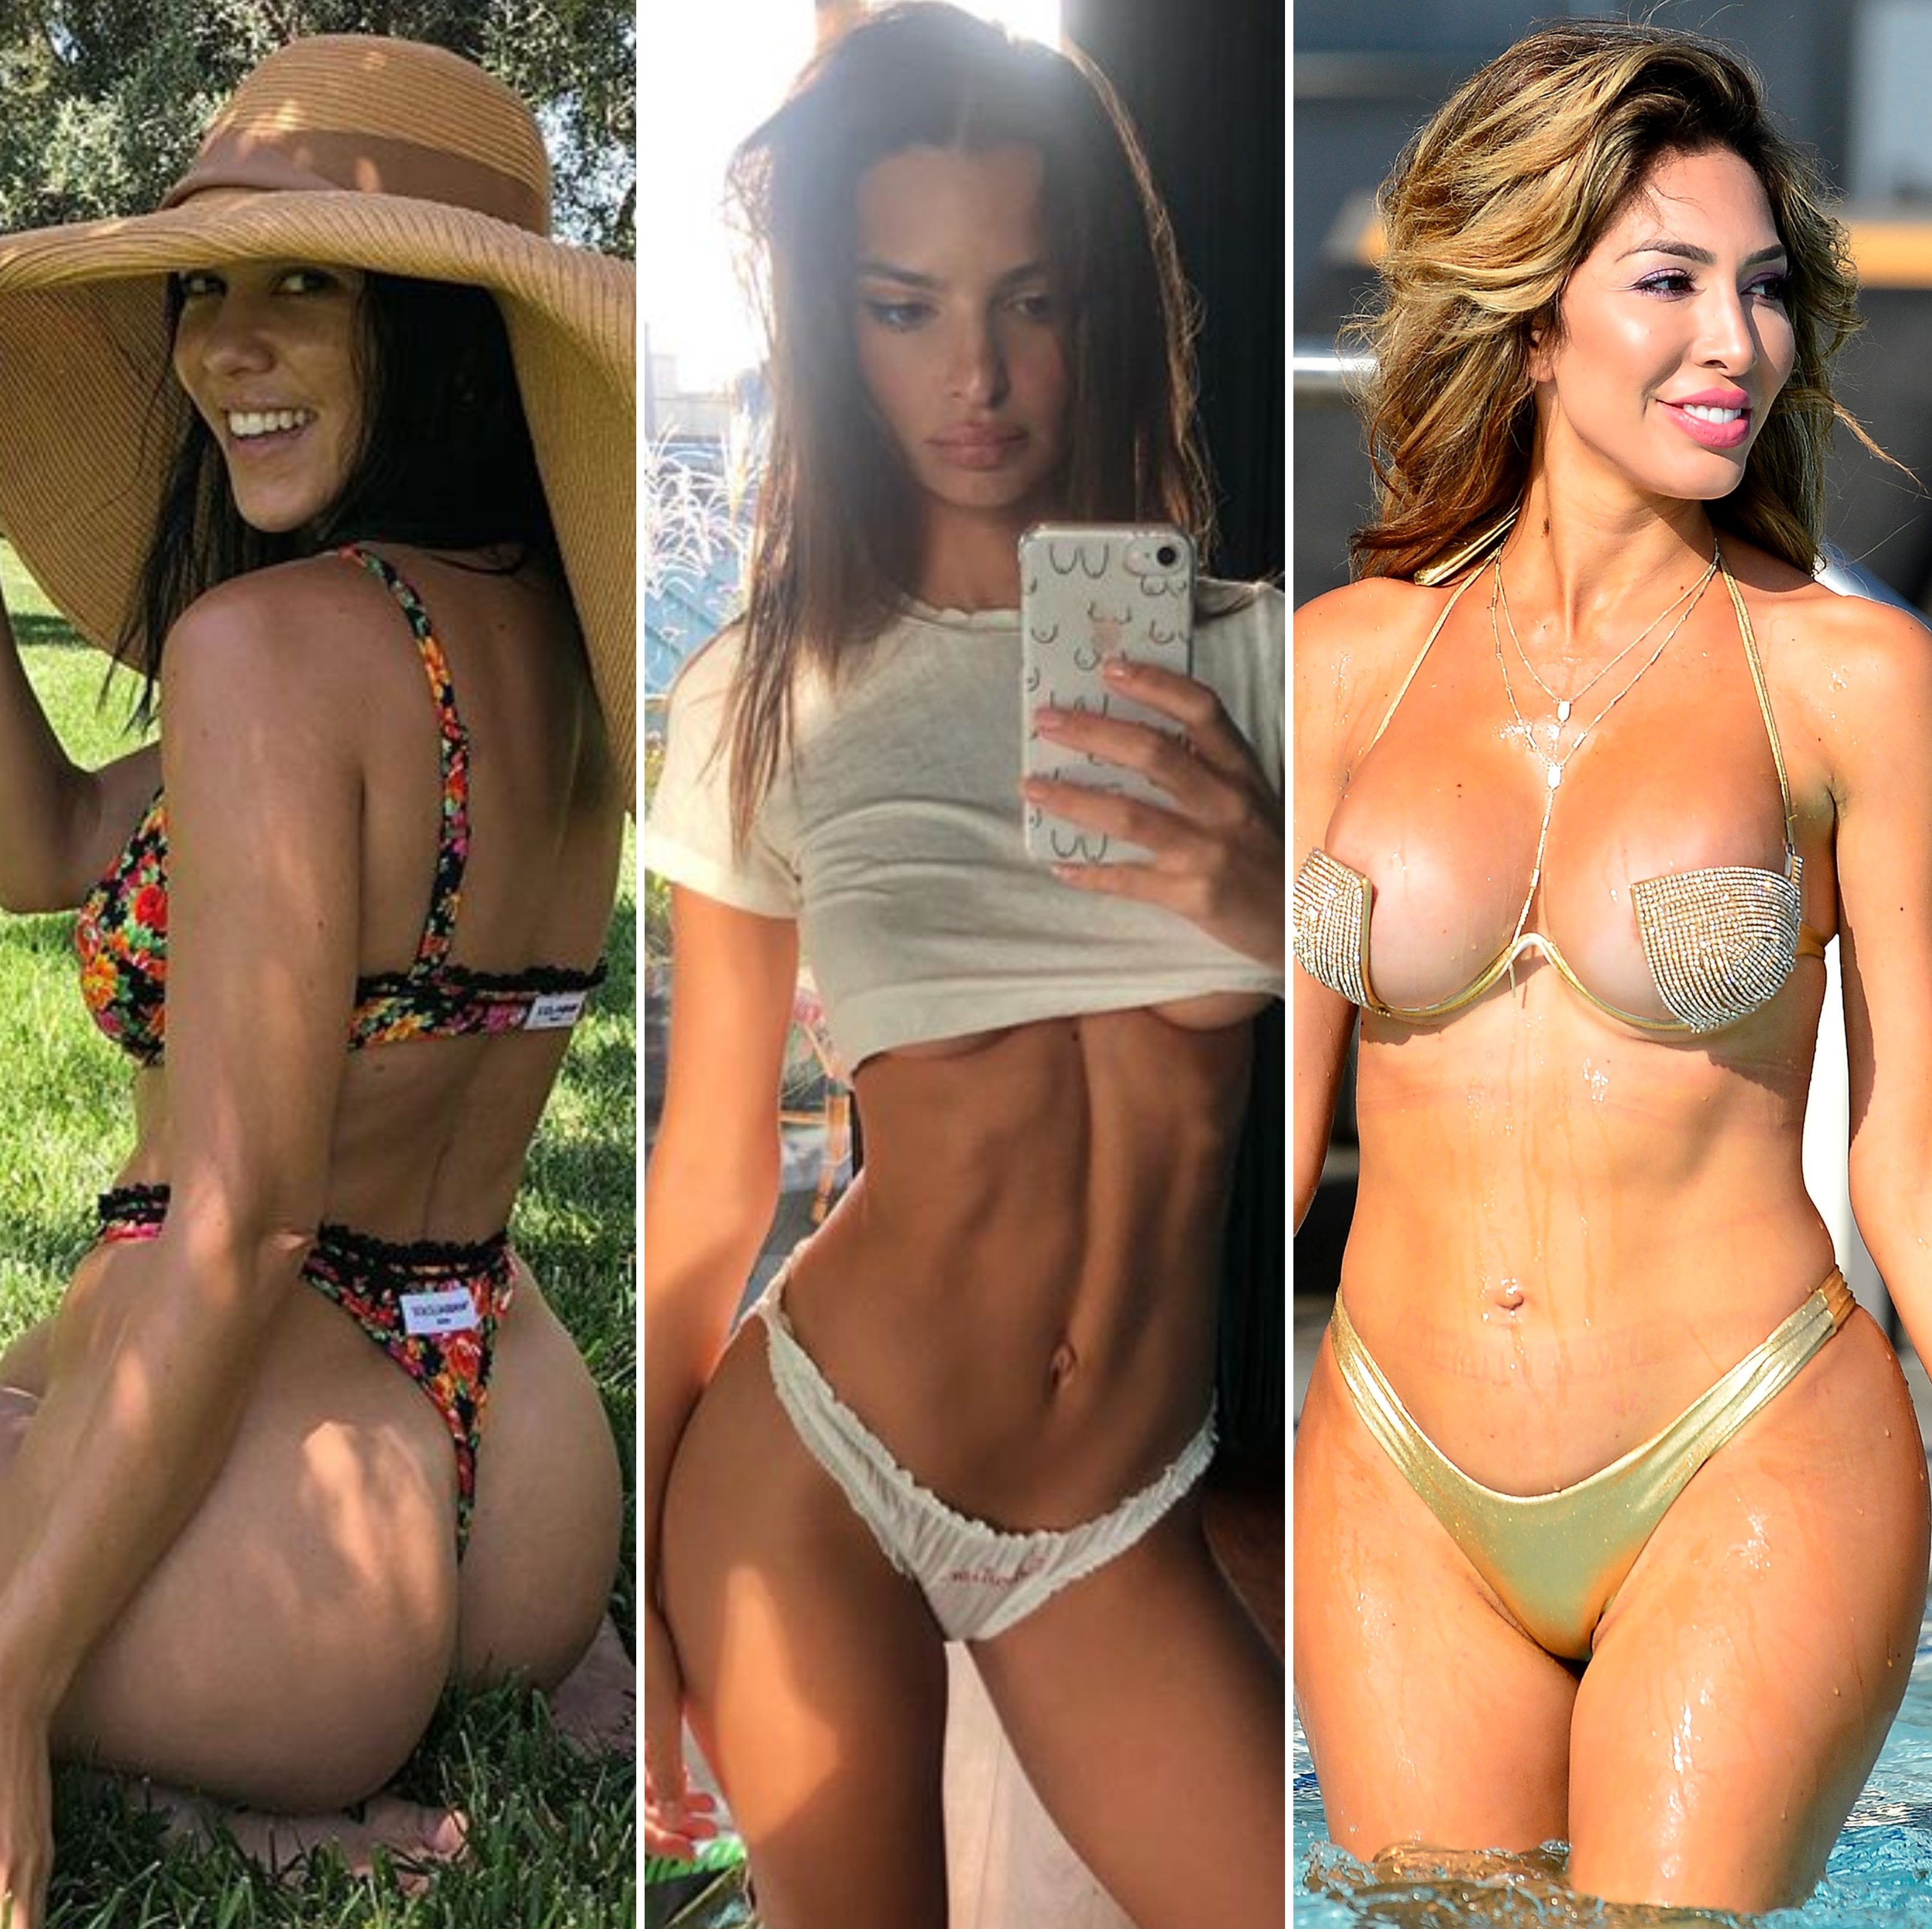 Sweet Celeb Tits - Stars Who Love Being Naked: Celebs Showing Skin, Going Nude